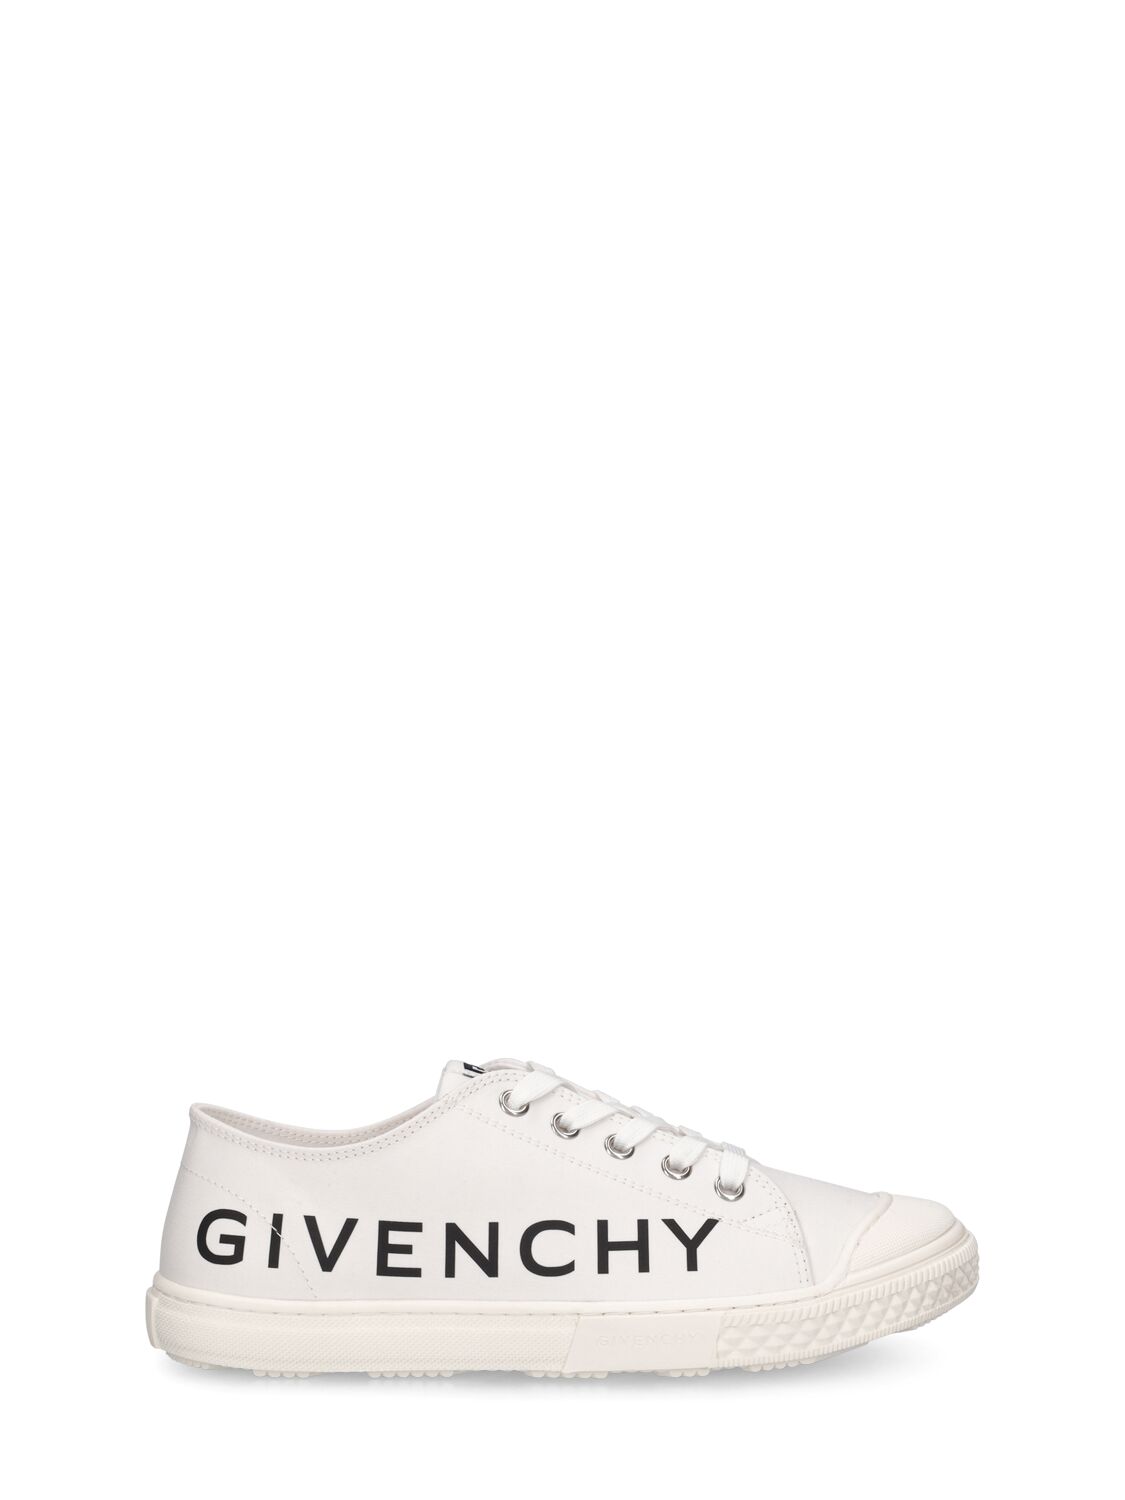 Givenchy Logo Canvas Trainers In White